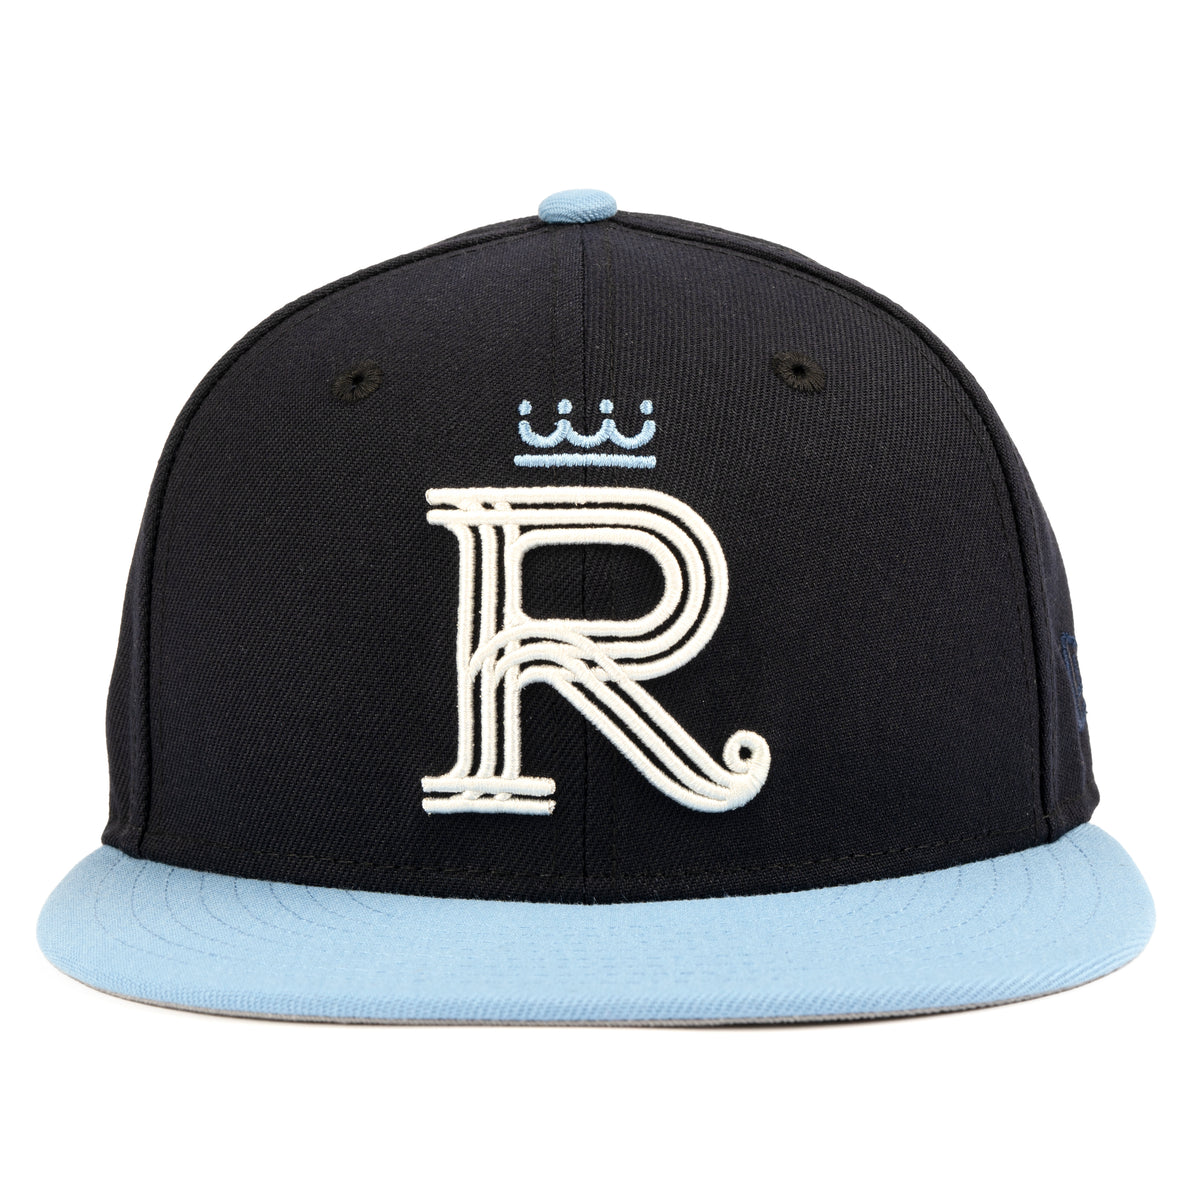 KANSAS CITY ROYALS CITY CONNECT 59FIFTY FITTED HAT – Anthem Shop